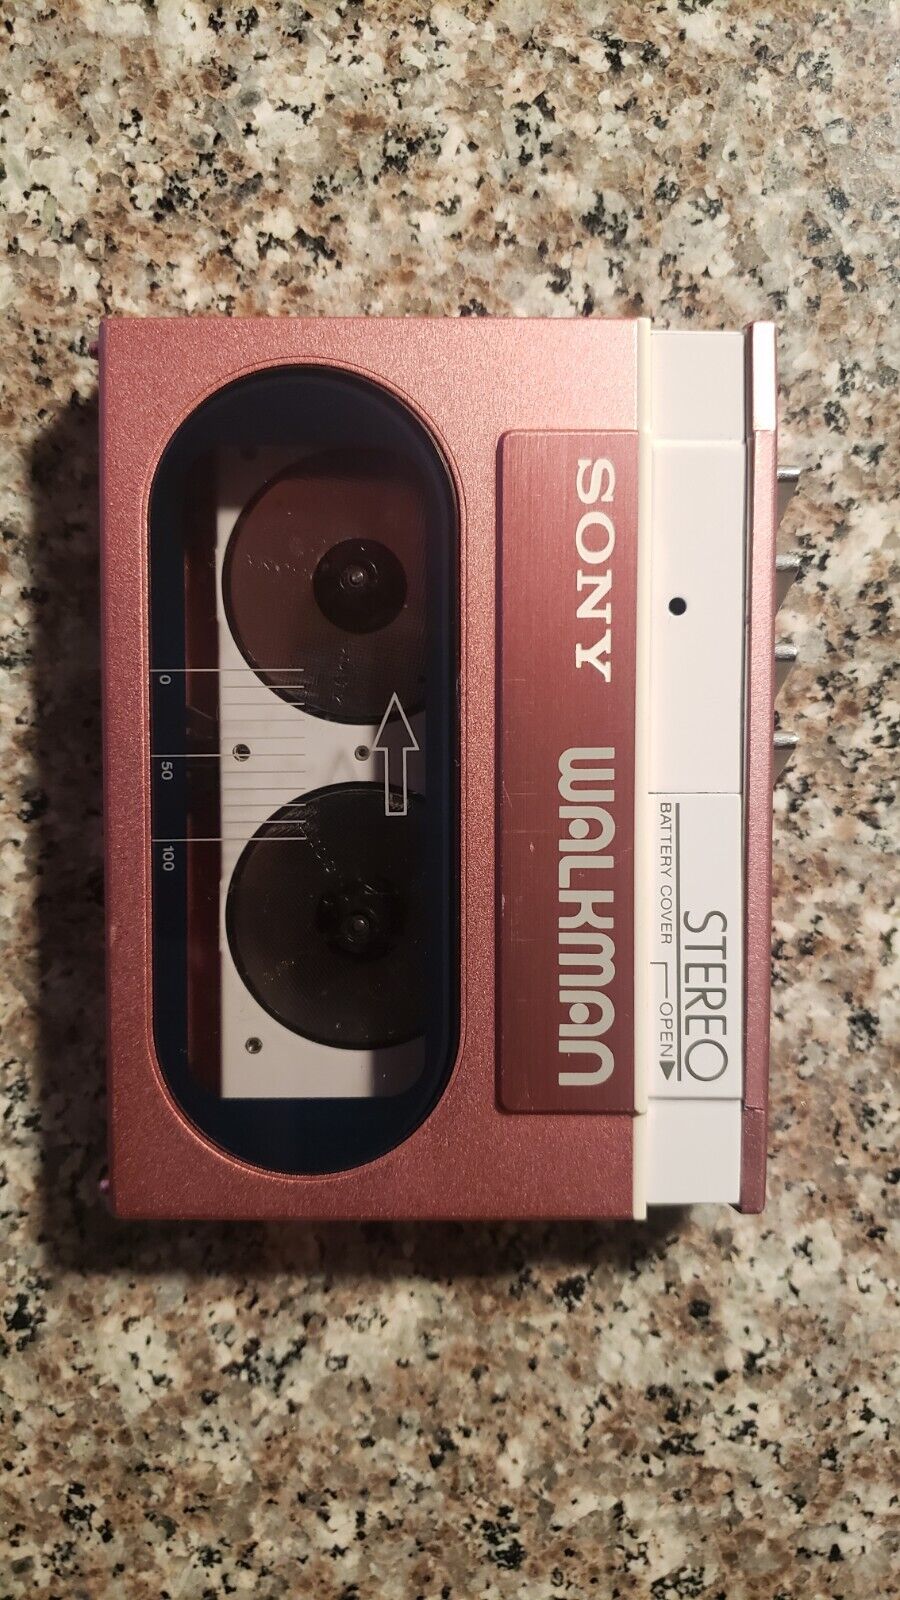 SONY Walkman WM-20 Stereo Cassette Player, Excellent Condition !